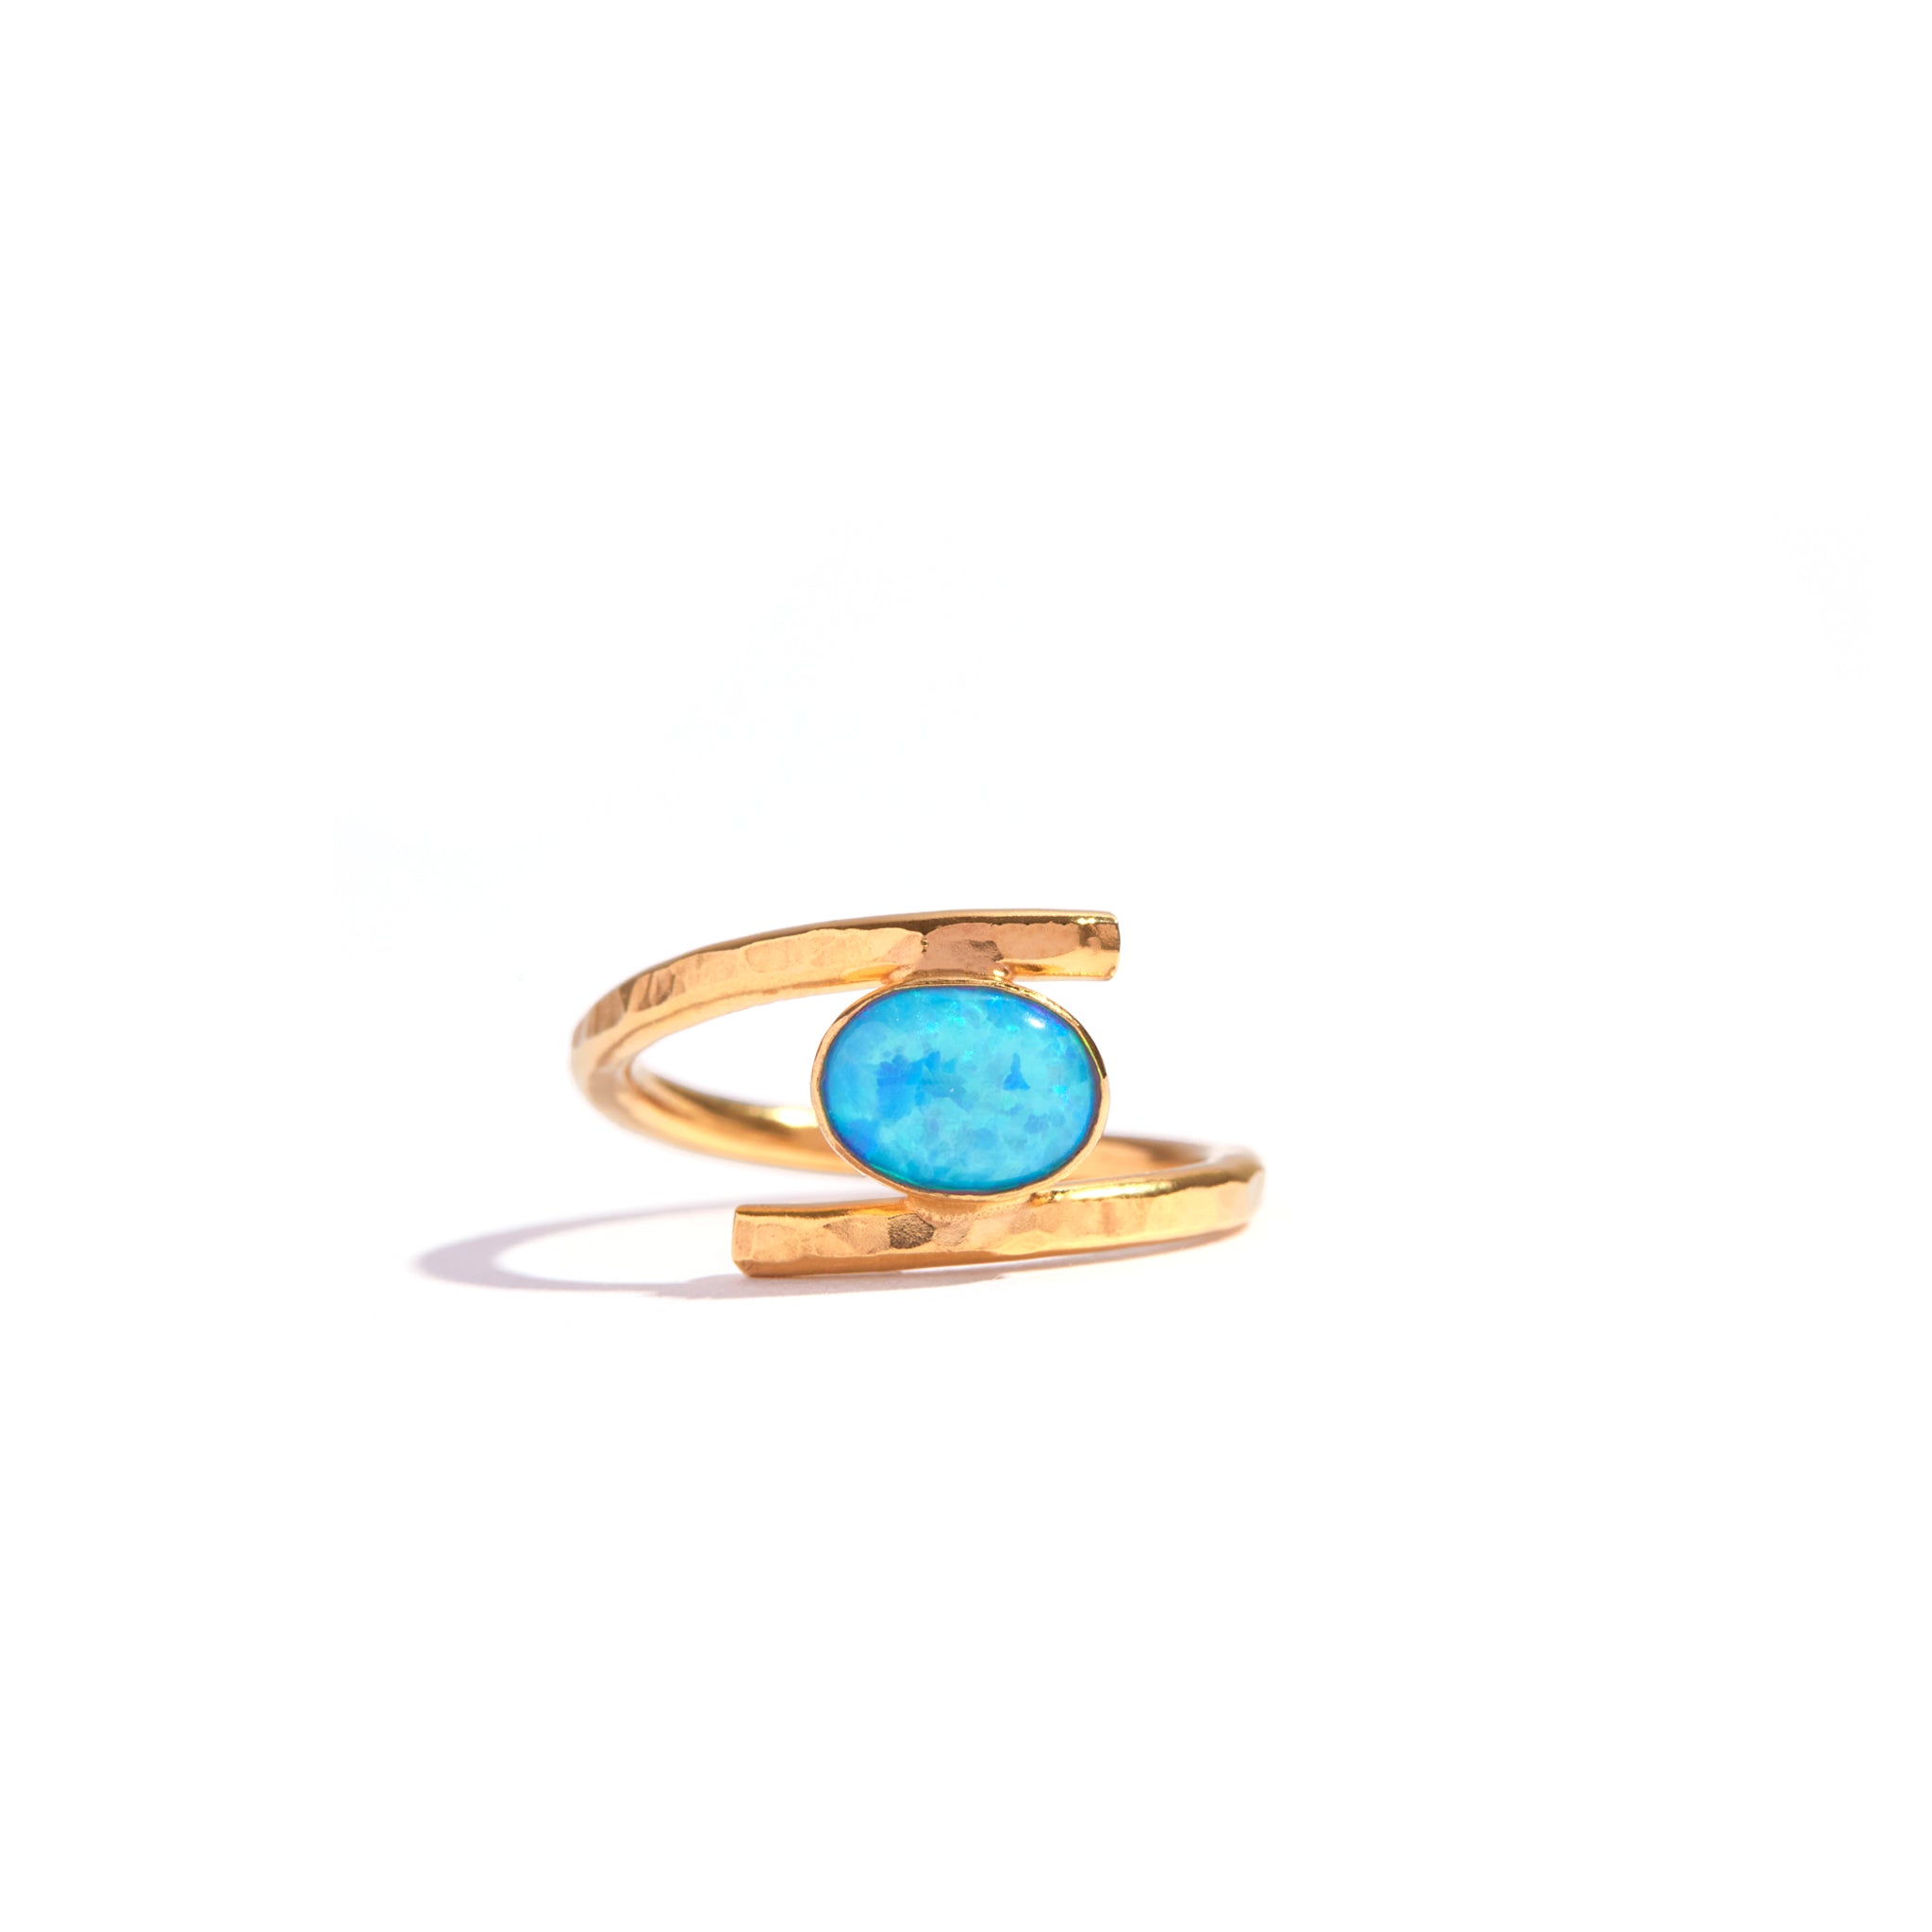 Blue Opal Gold Twist Ring featuring a stunning blue opal stone set in an elegant 14ct gold filled design. Combine opal's elegance with gold's sophistication. Add charm to any outfit with this luxurious and durable piece